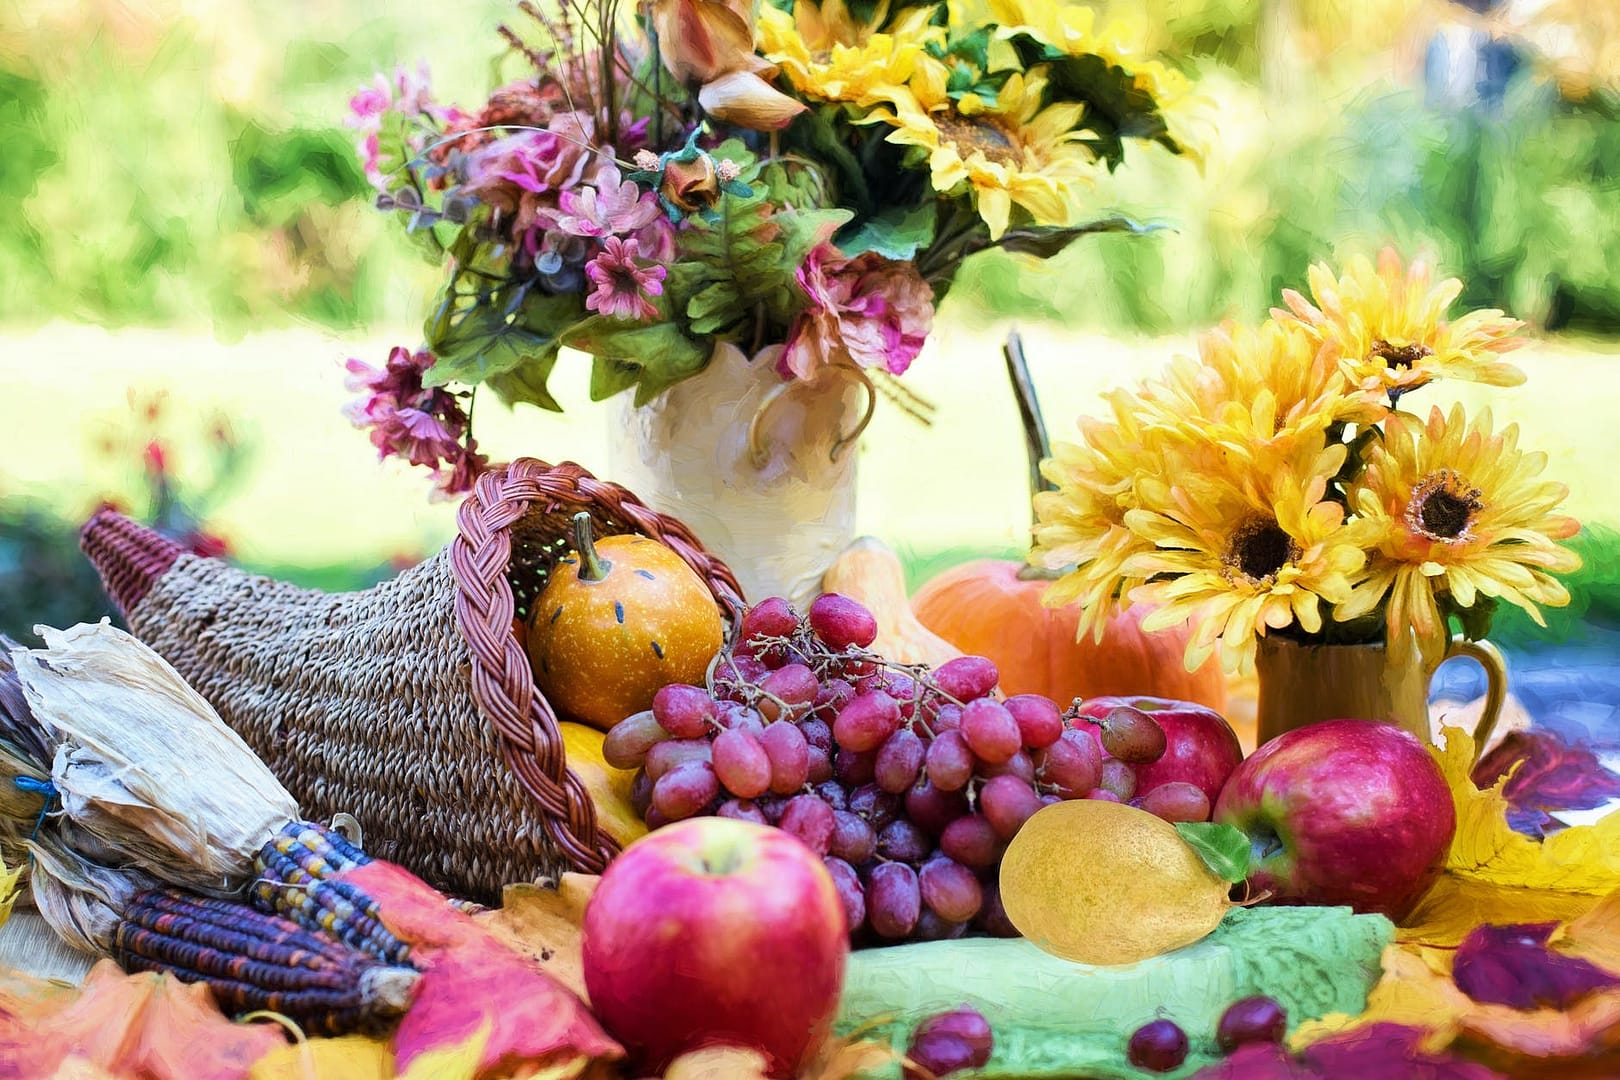 yellow sunflower and red apple fruits on green table